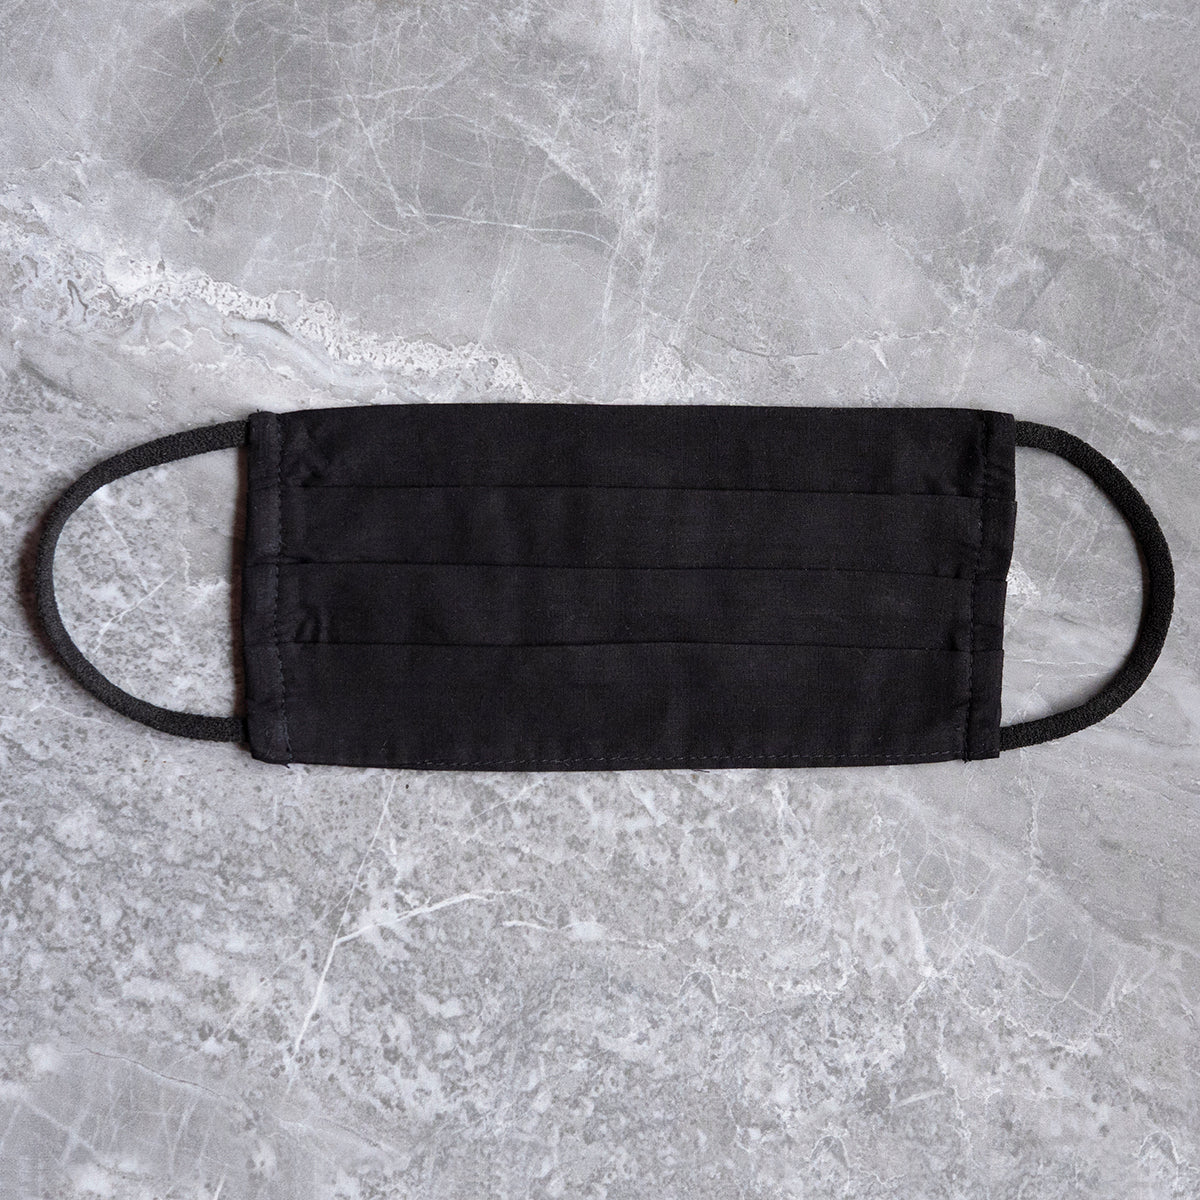 A plain black cloth face mask displayed on a textured marble background, highlighting a simple and essential health accessory.